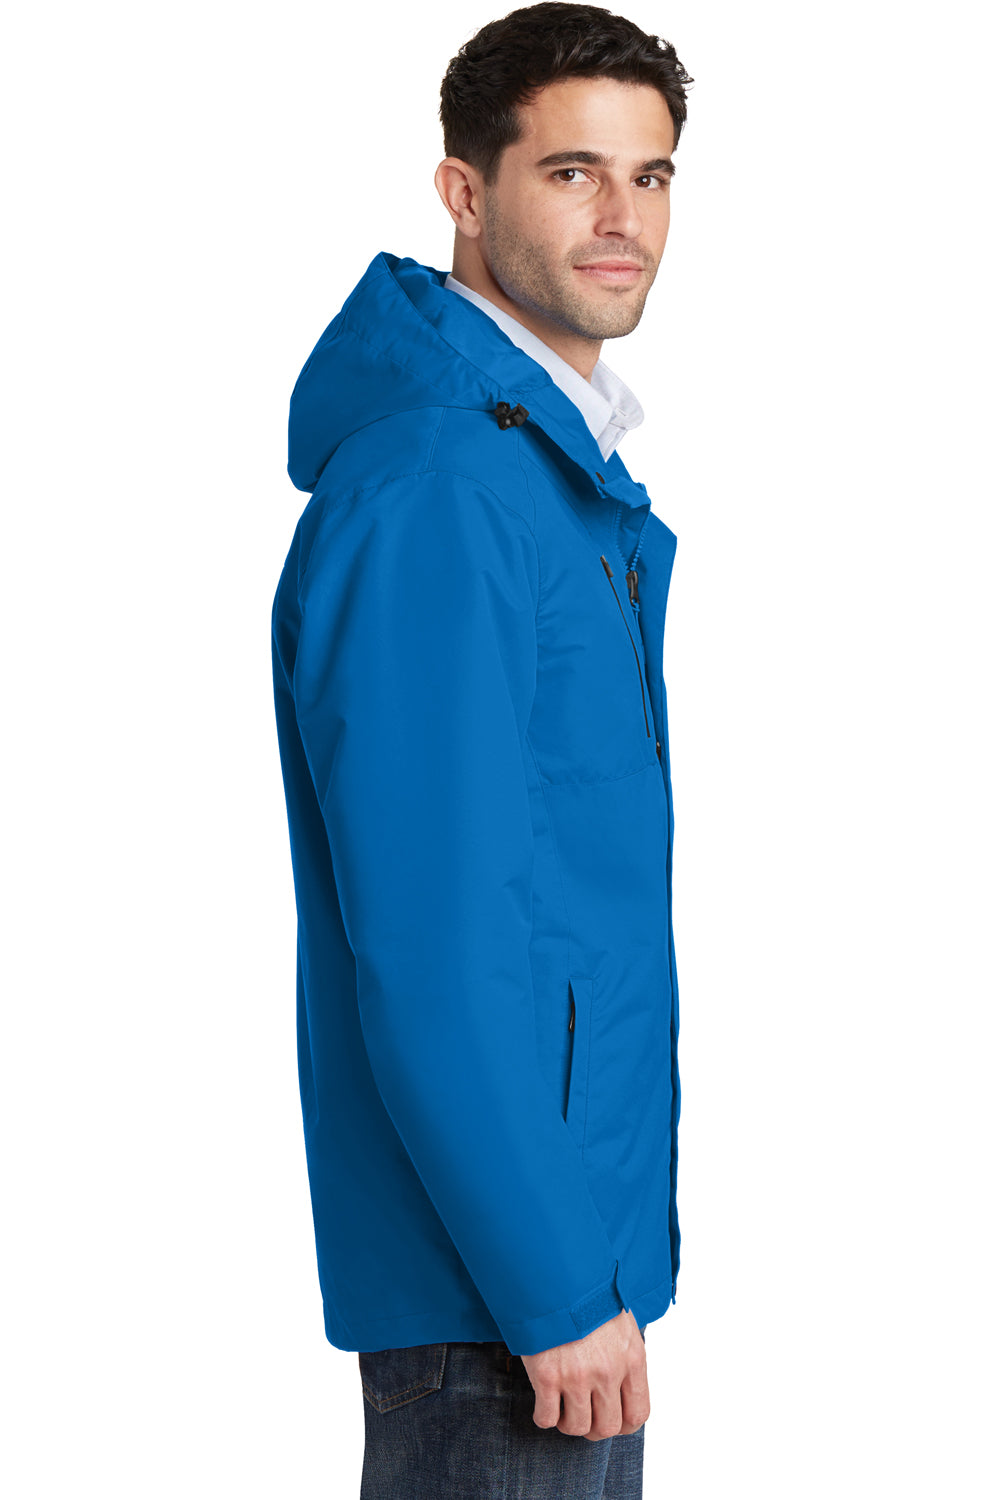 Port Authority J331 Mens All Conditions Waterproof Full Zip Hooded Jacket Direct Blue Side